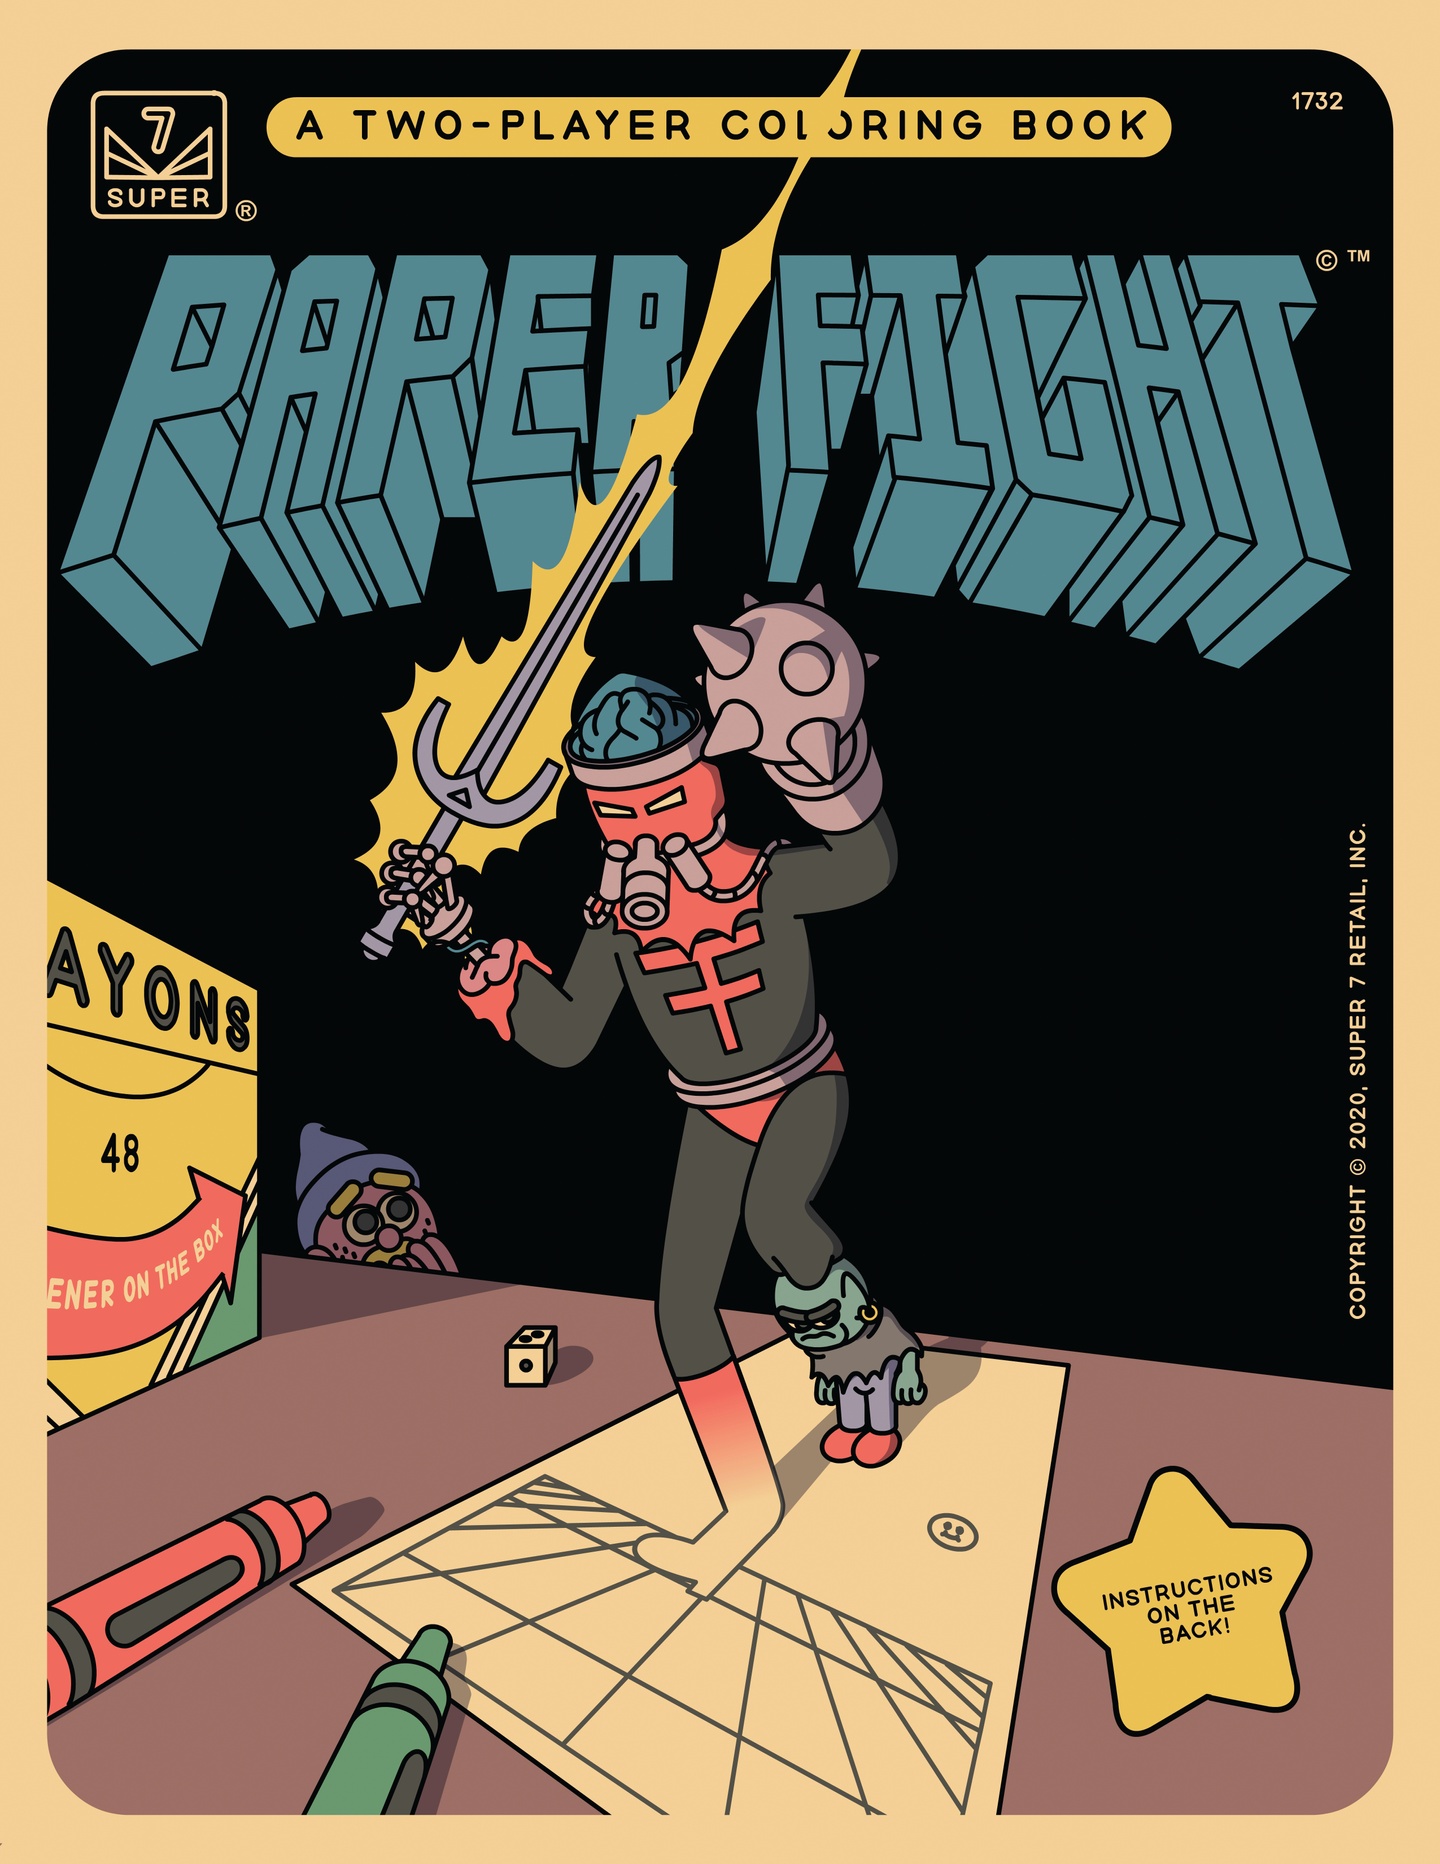 Cover of Paper Fight coloring book, featuring a fighter character emerging from a coloring page waving a laser sword.